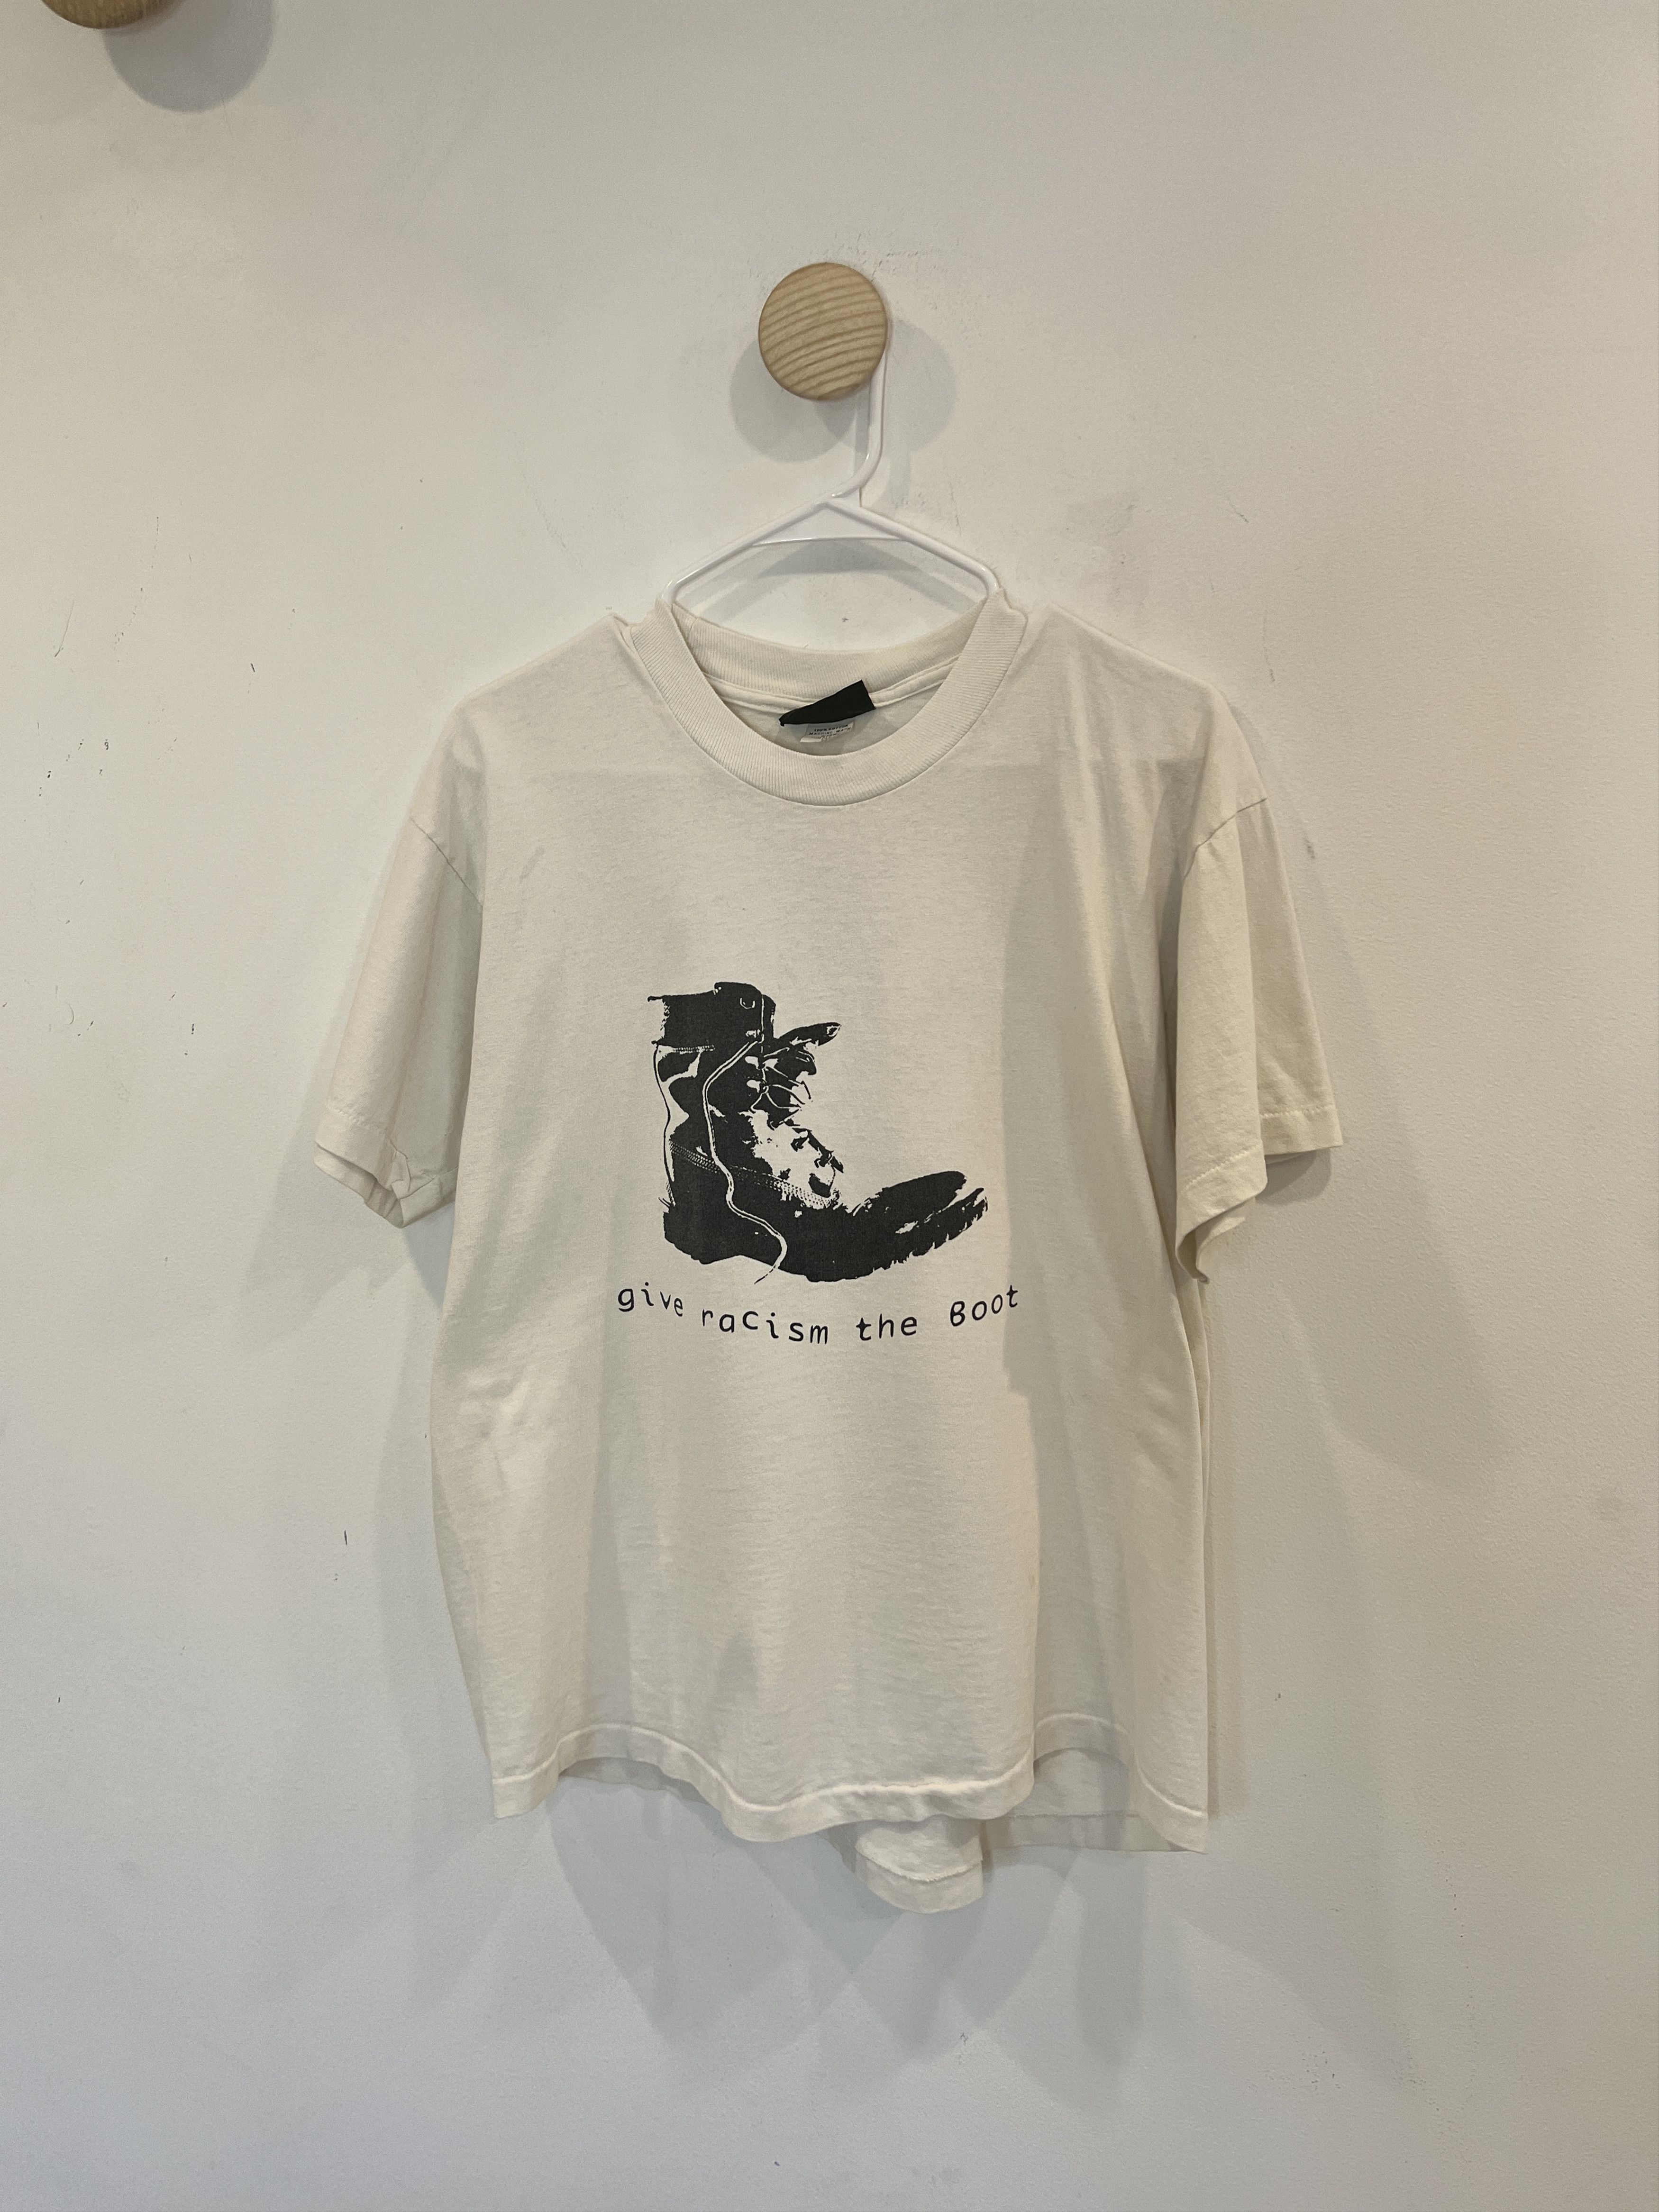 Timberland Give Racism the Boot Tee | Grailed